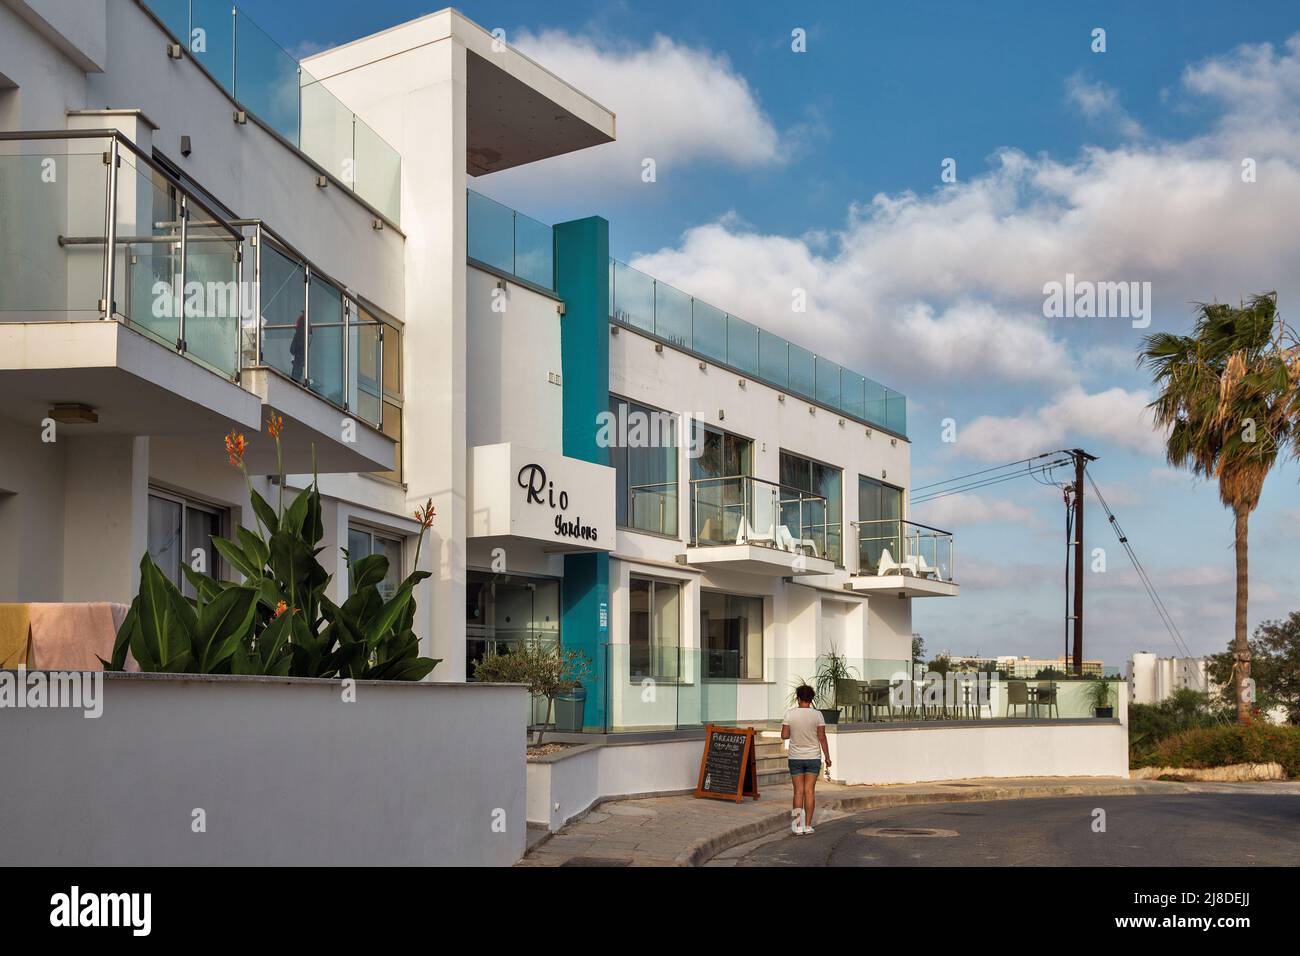 Ayia Napa, Cyprus - May 28, 2021: Modern small hotel Rio Gardens facade in a resort town. Ayia Napa is a tourist resort at the far eastern end of the Stock Photo